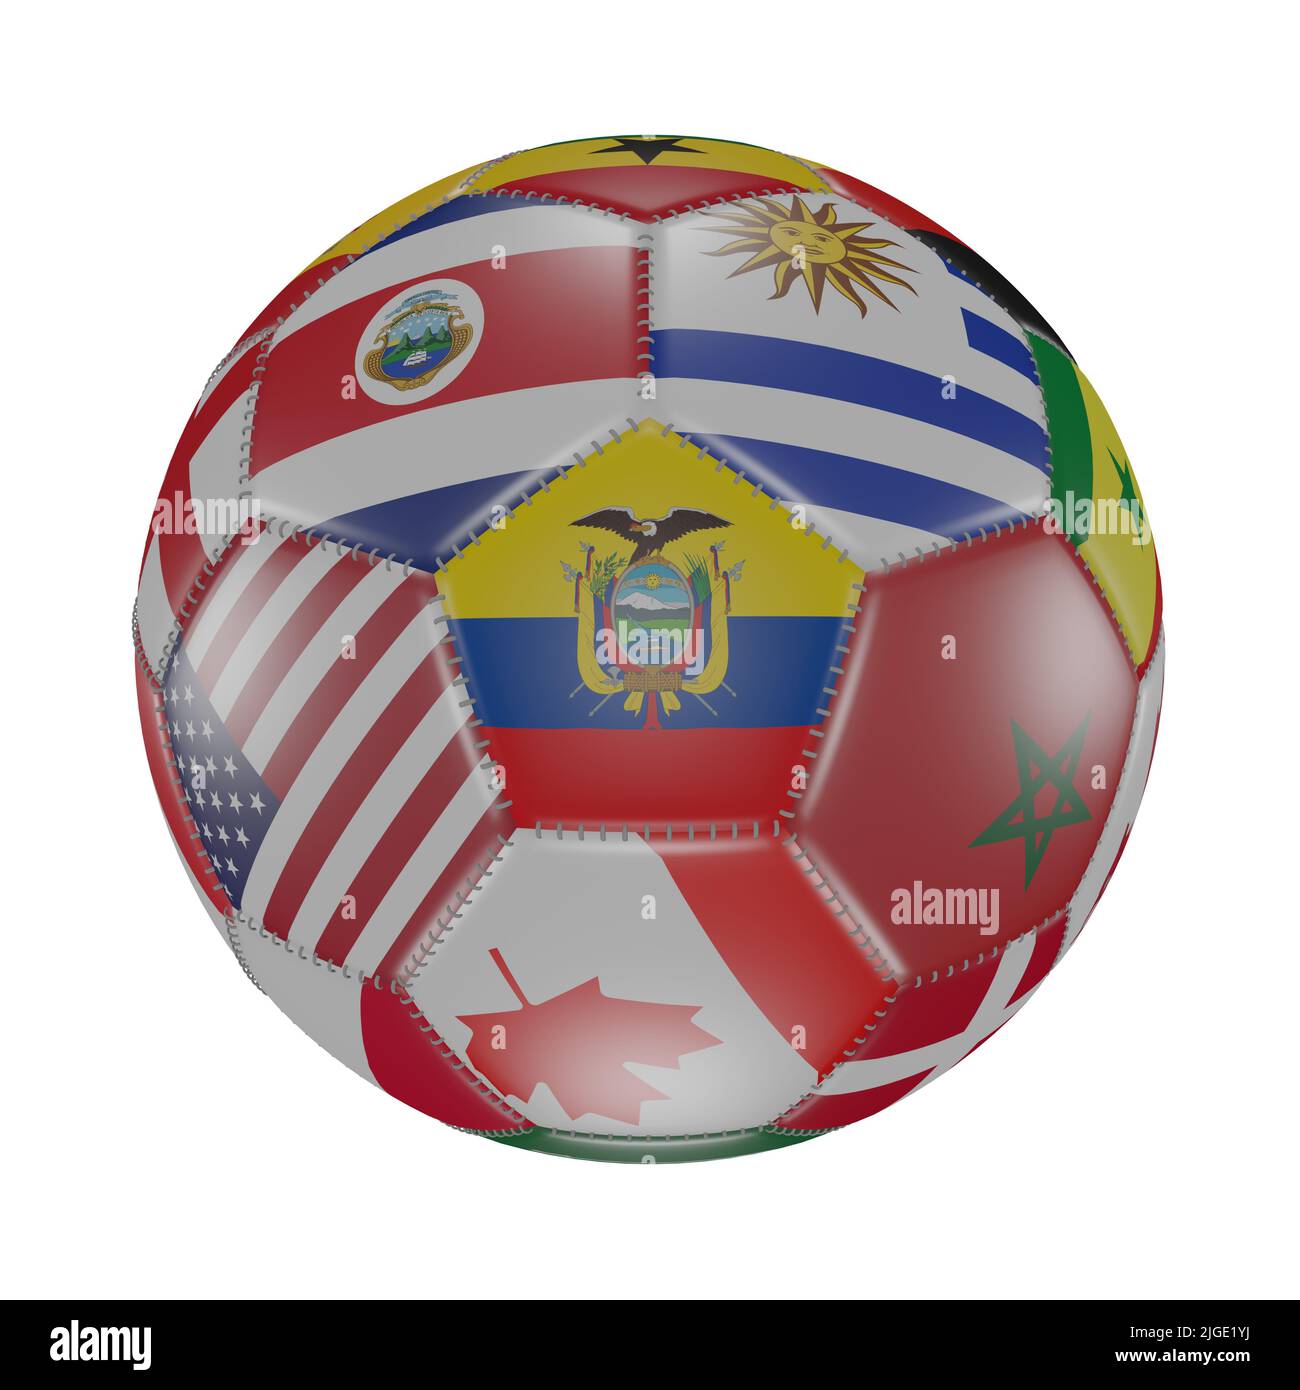 Ecuador flag among other world flags on 3D soccer ball. Isolated on white. Qatar 2022. Render Stock Photo